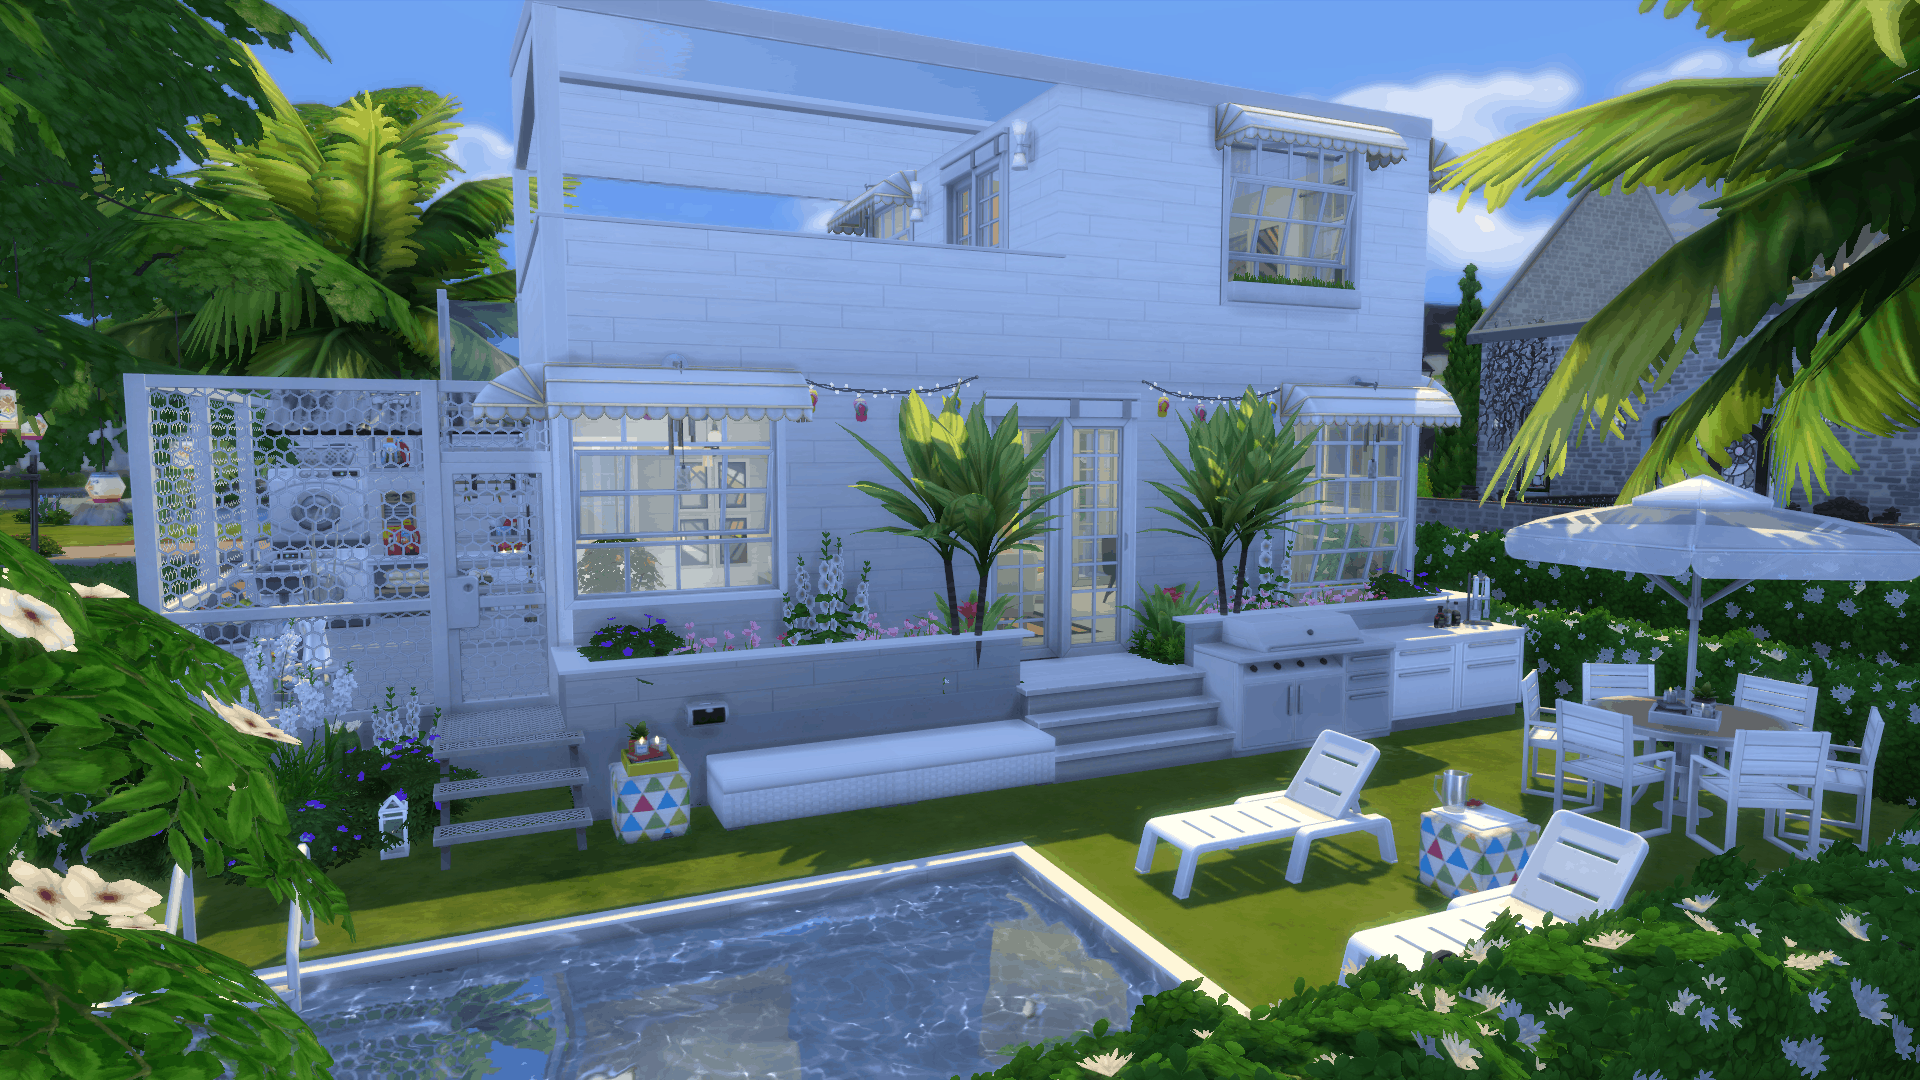 the sims 4 tiny house download